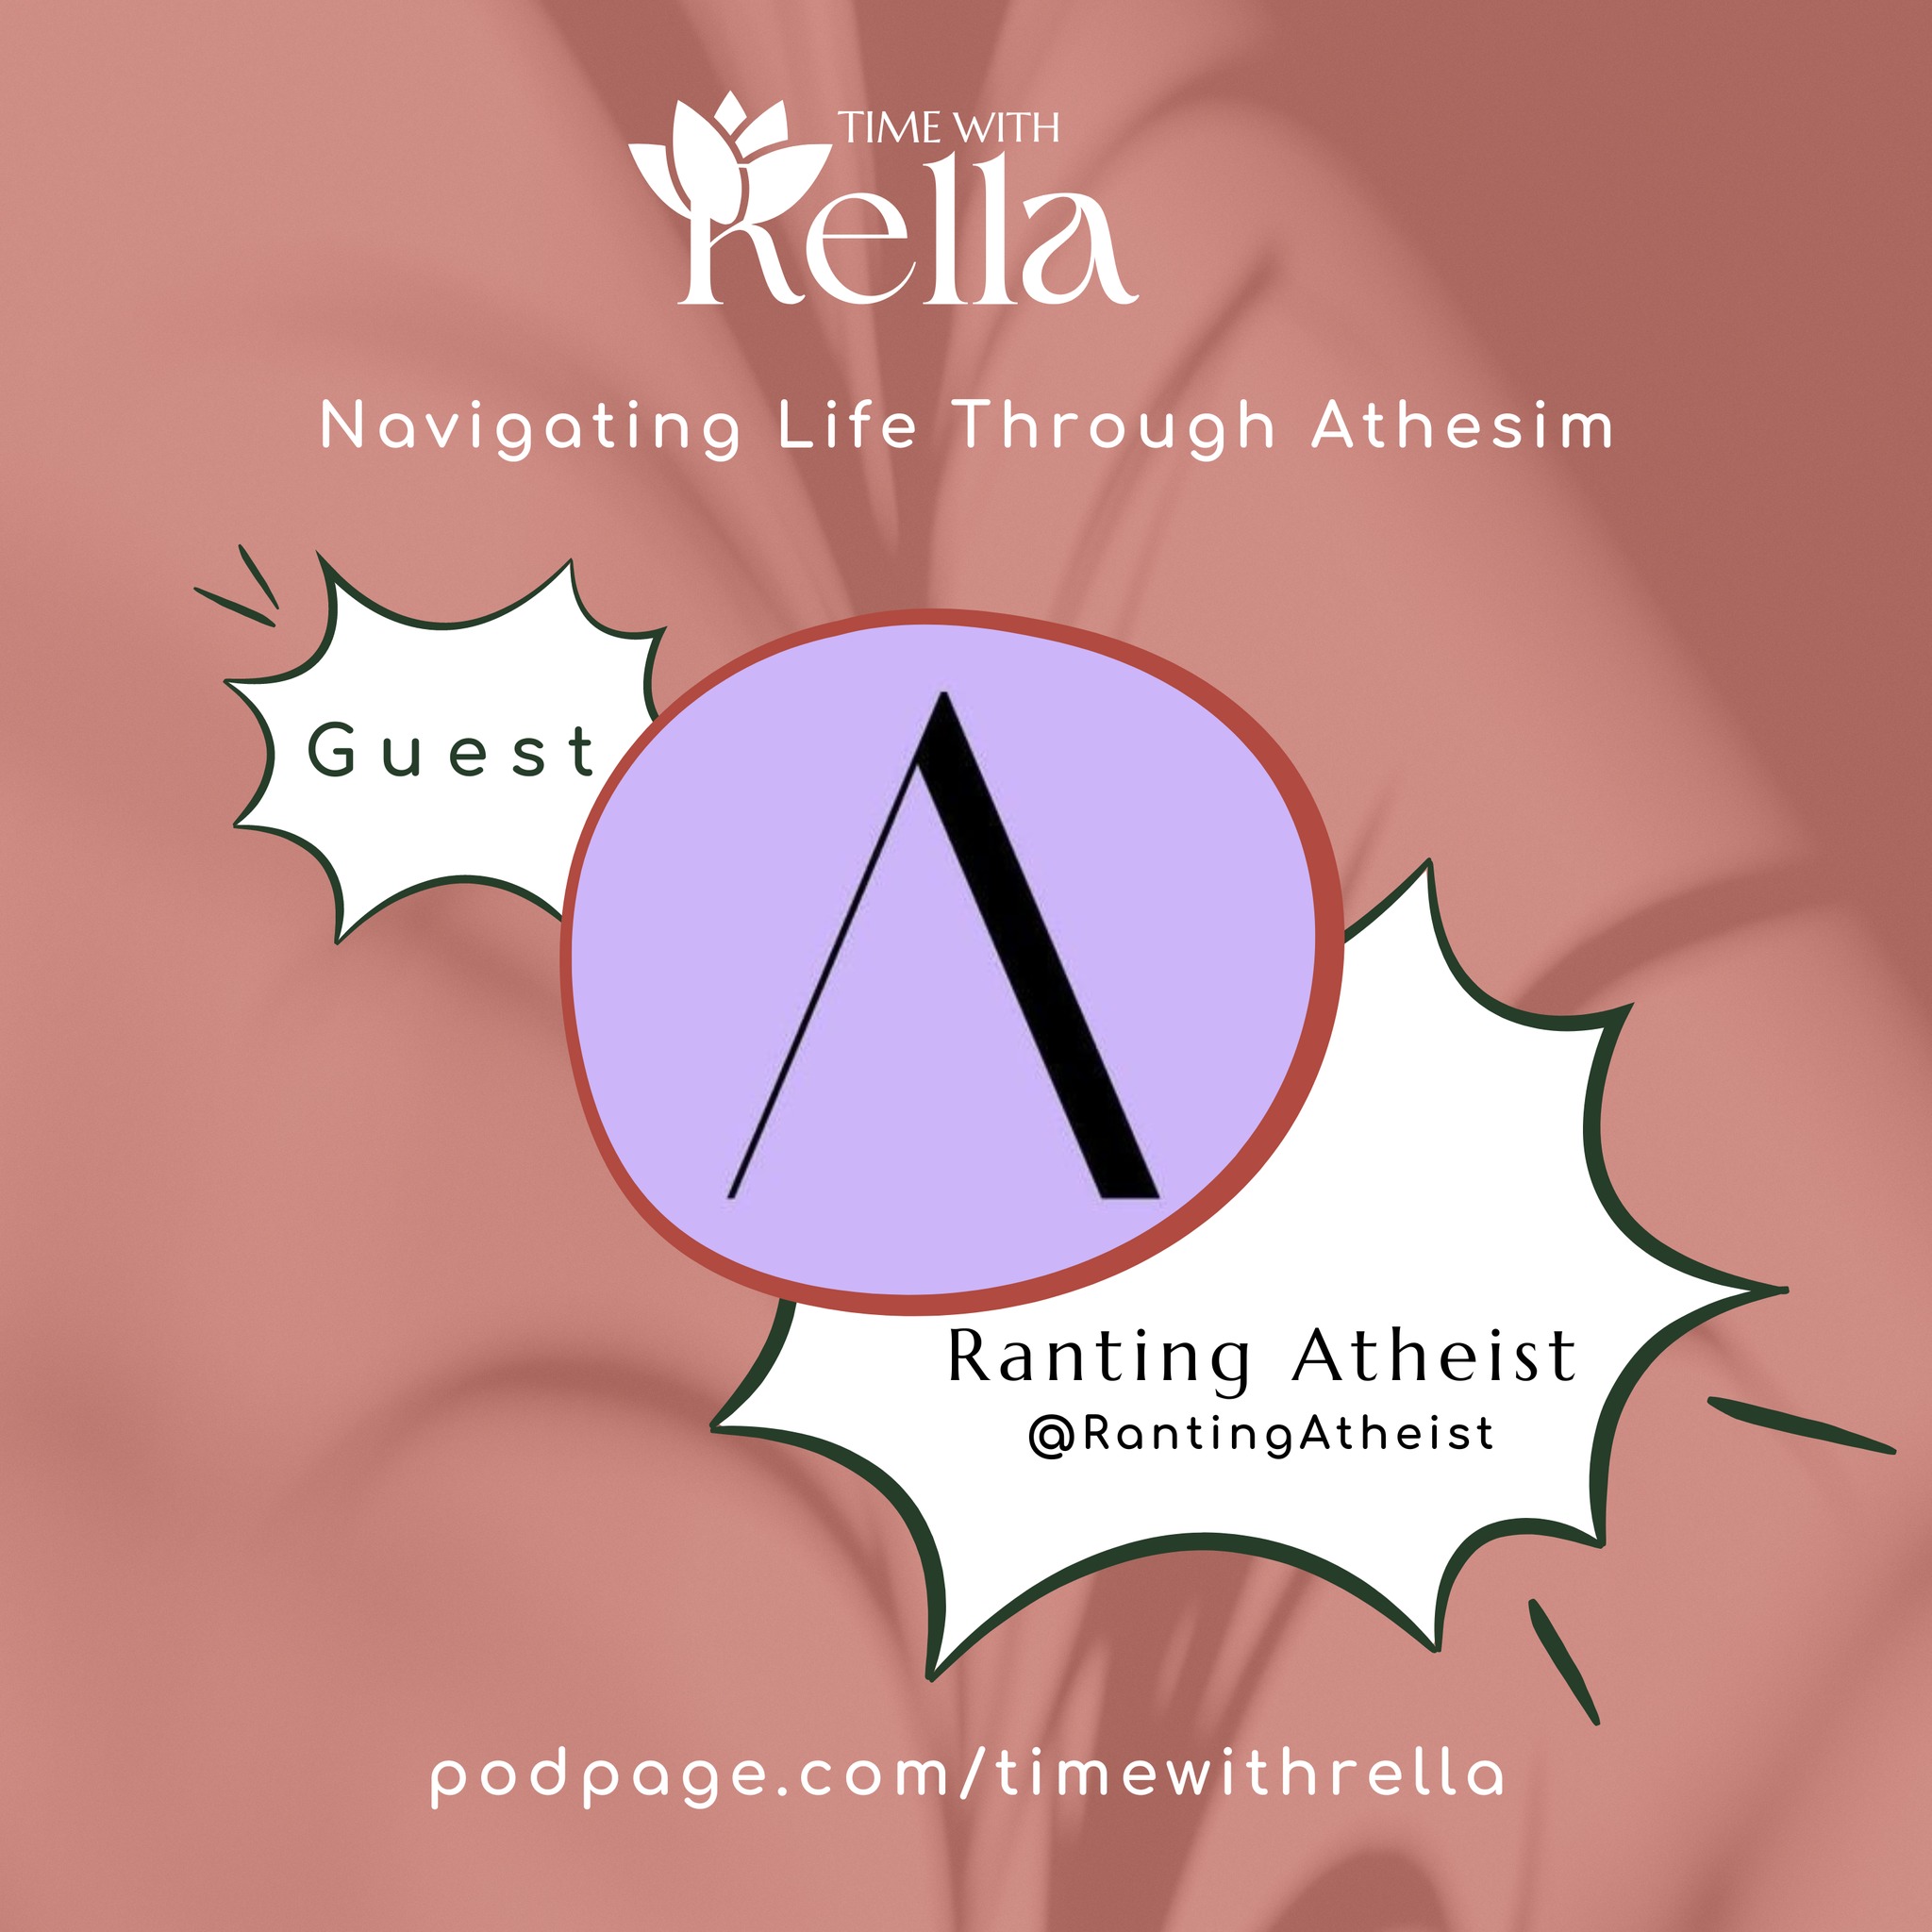 time with rella episode with Ranting athiest